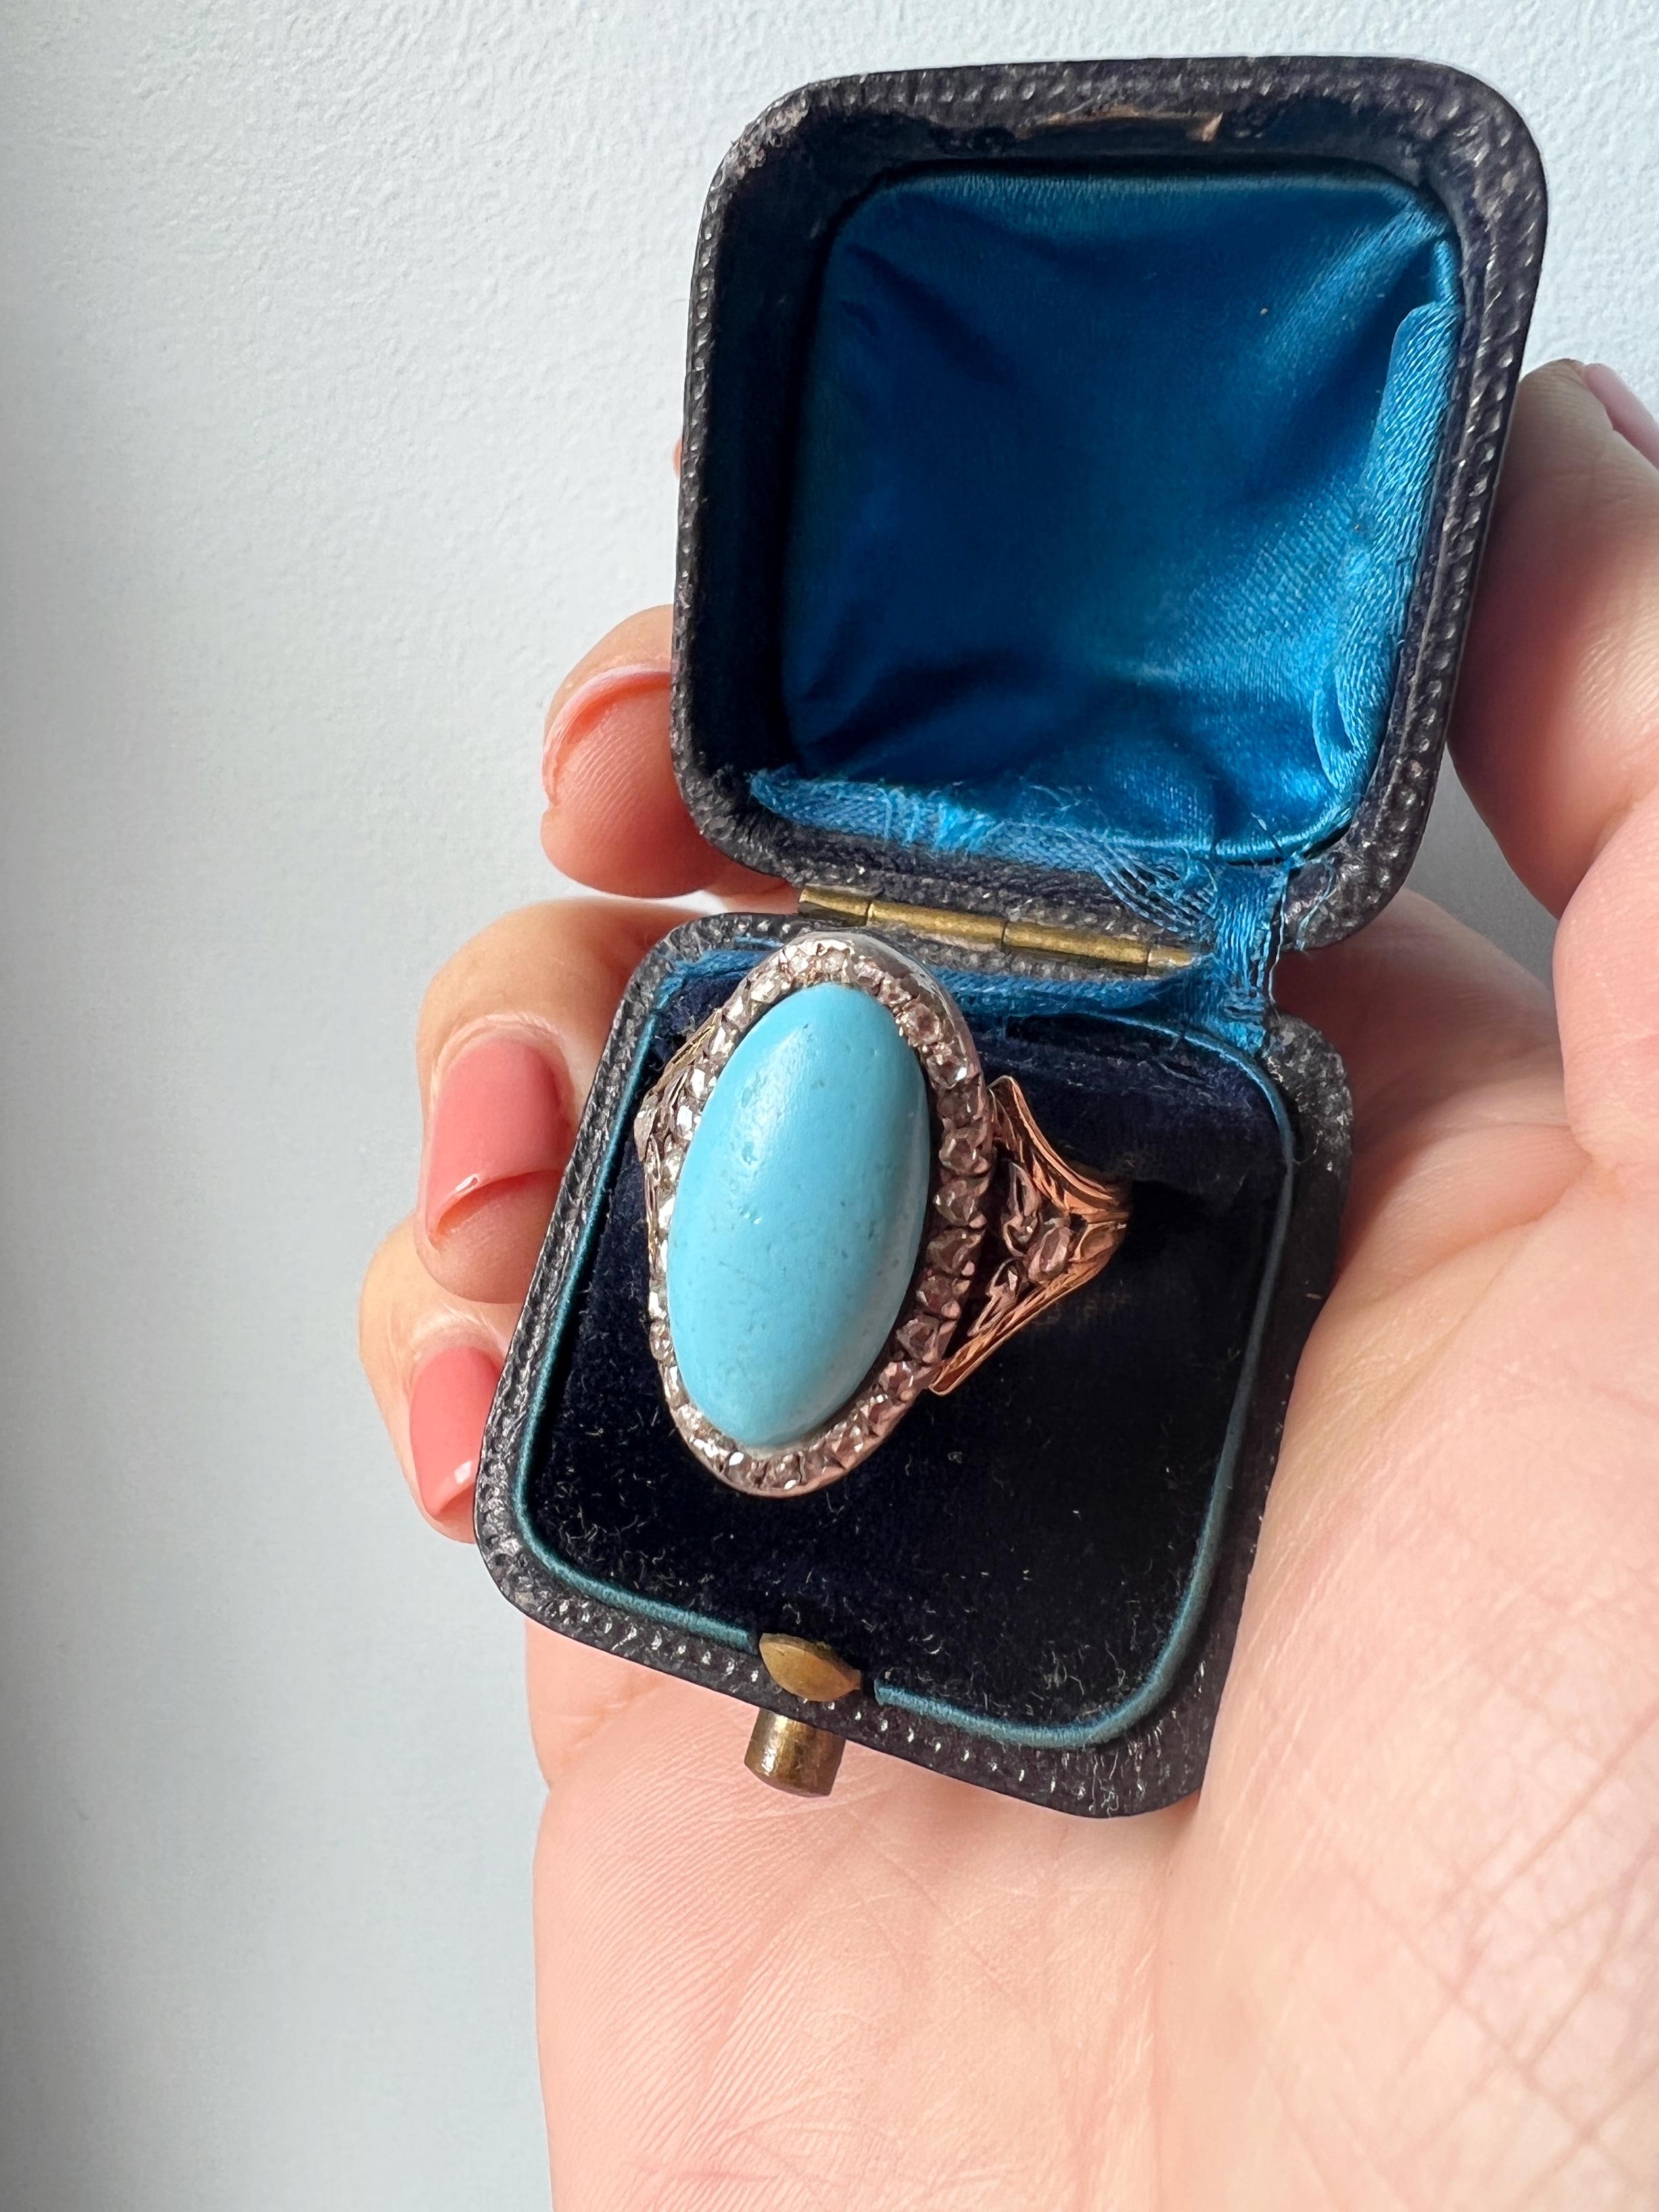 For sale a fabulous & very rare 18k statement ring featuring a beautiful blue pâte de verre in the center, surrounded by sparkling rose cut diamonds. The sublime sky blue color is perfectly captured in this fabulous ring. We also adore the shoulder